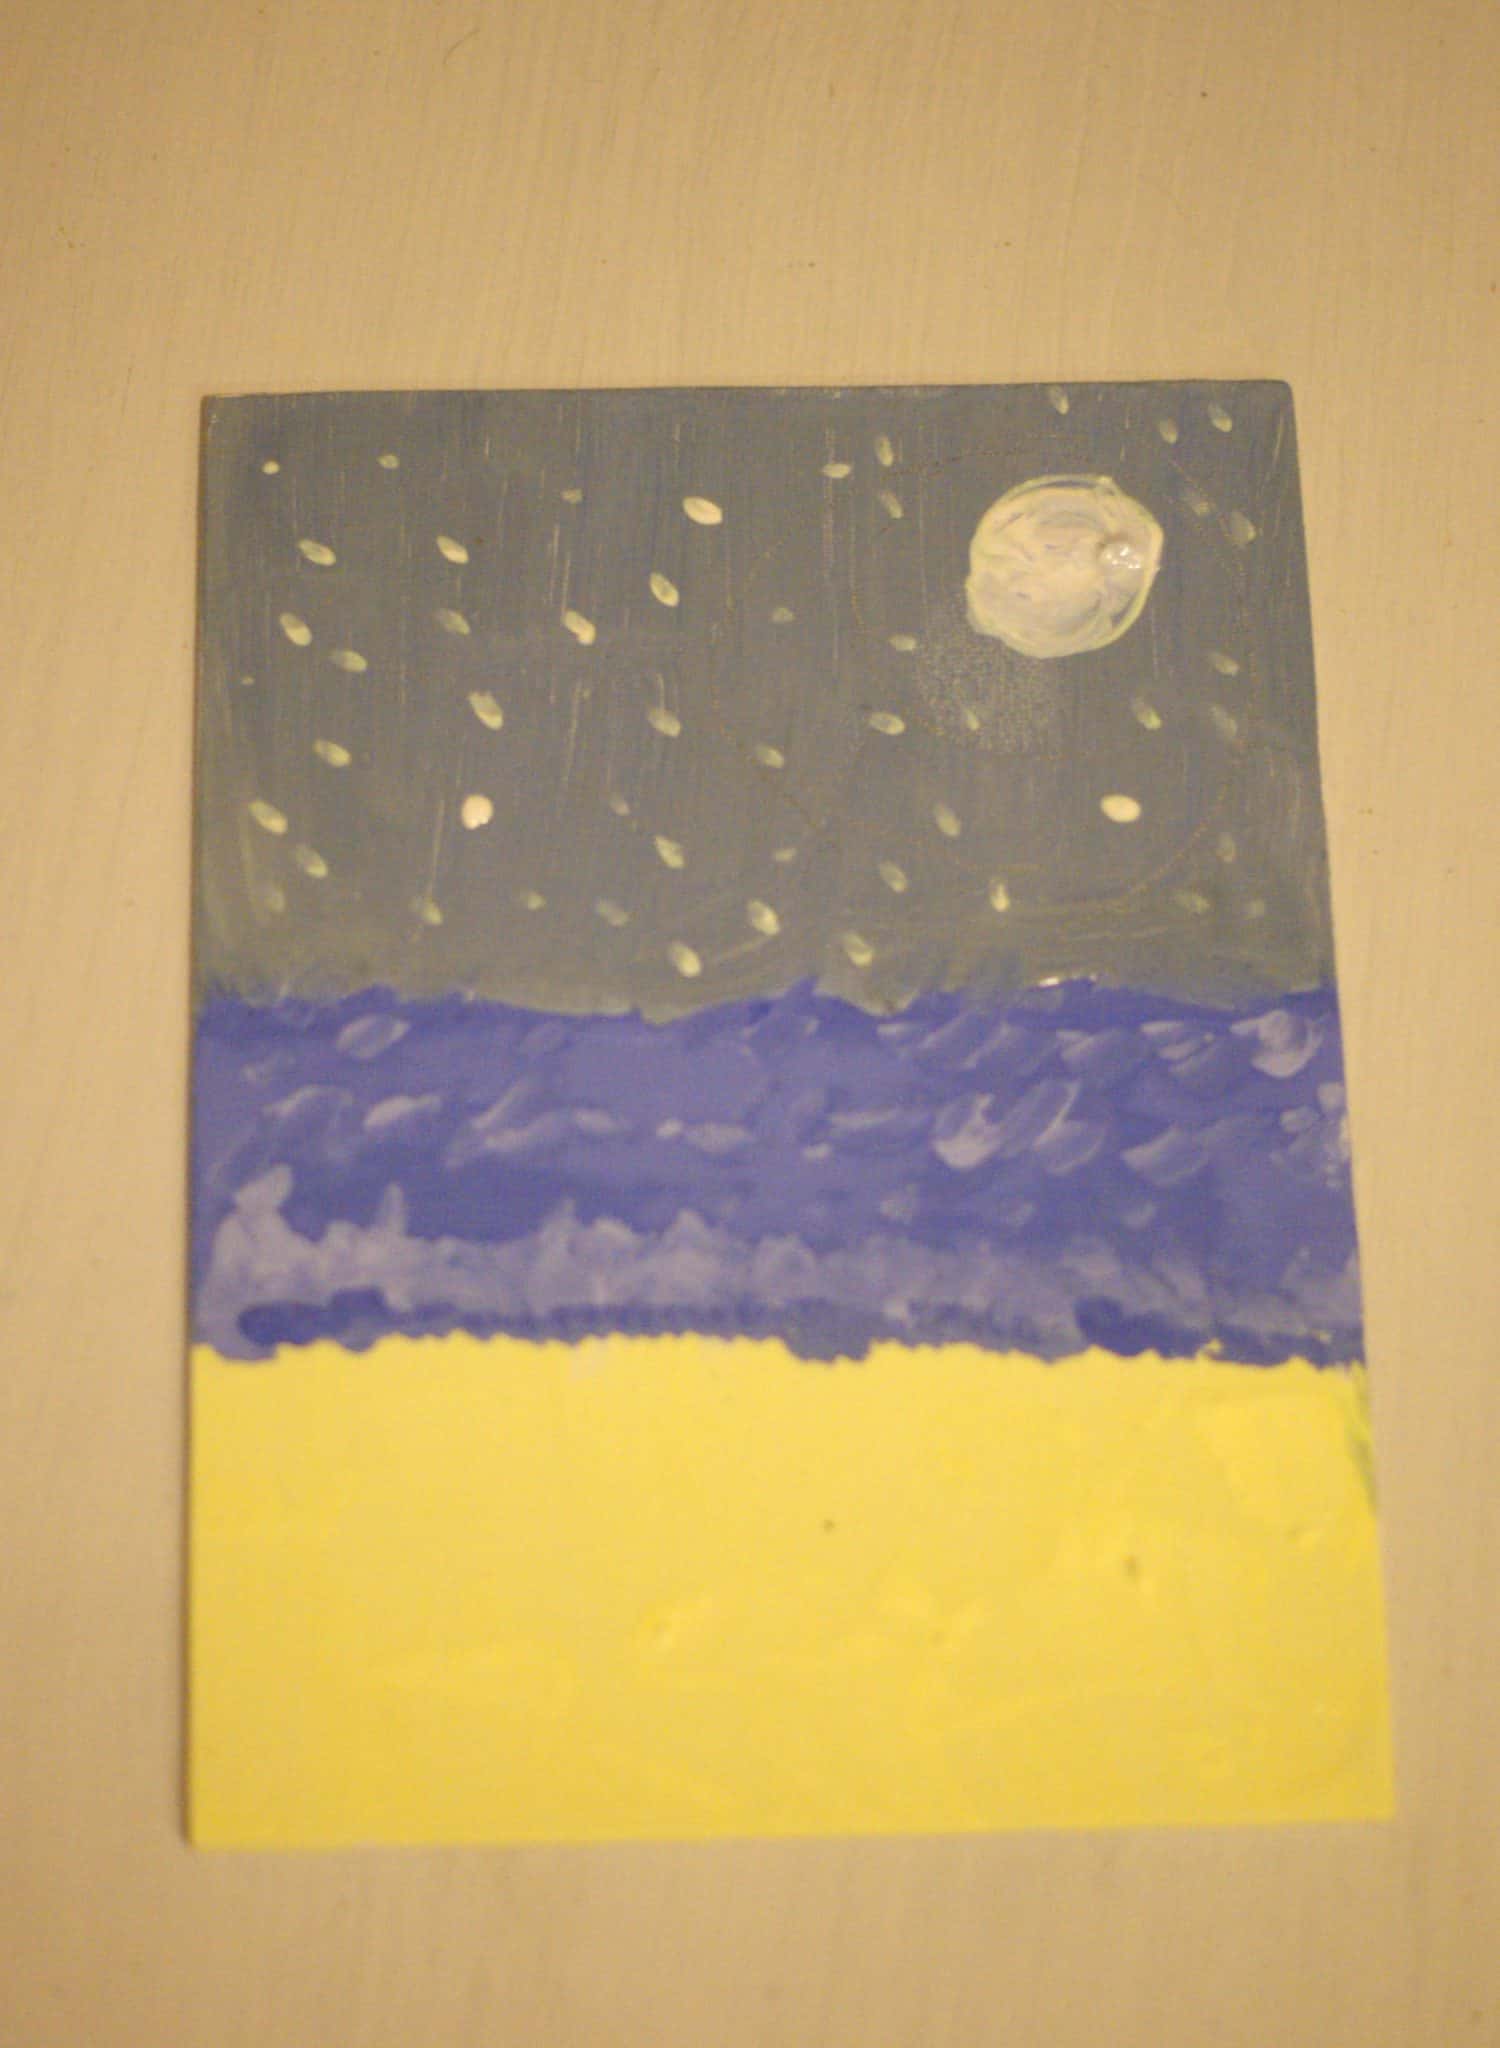 Sea Turtle Craft - Night Sky with moon and stars